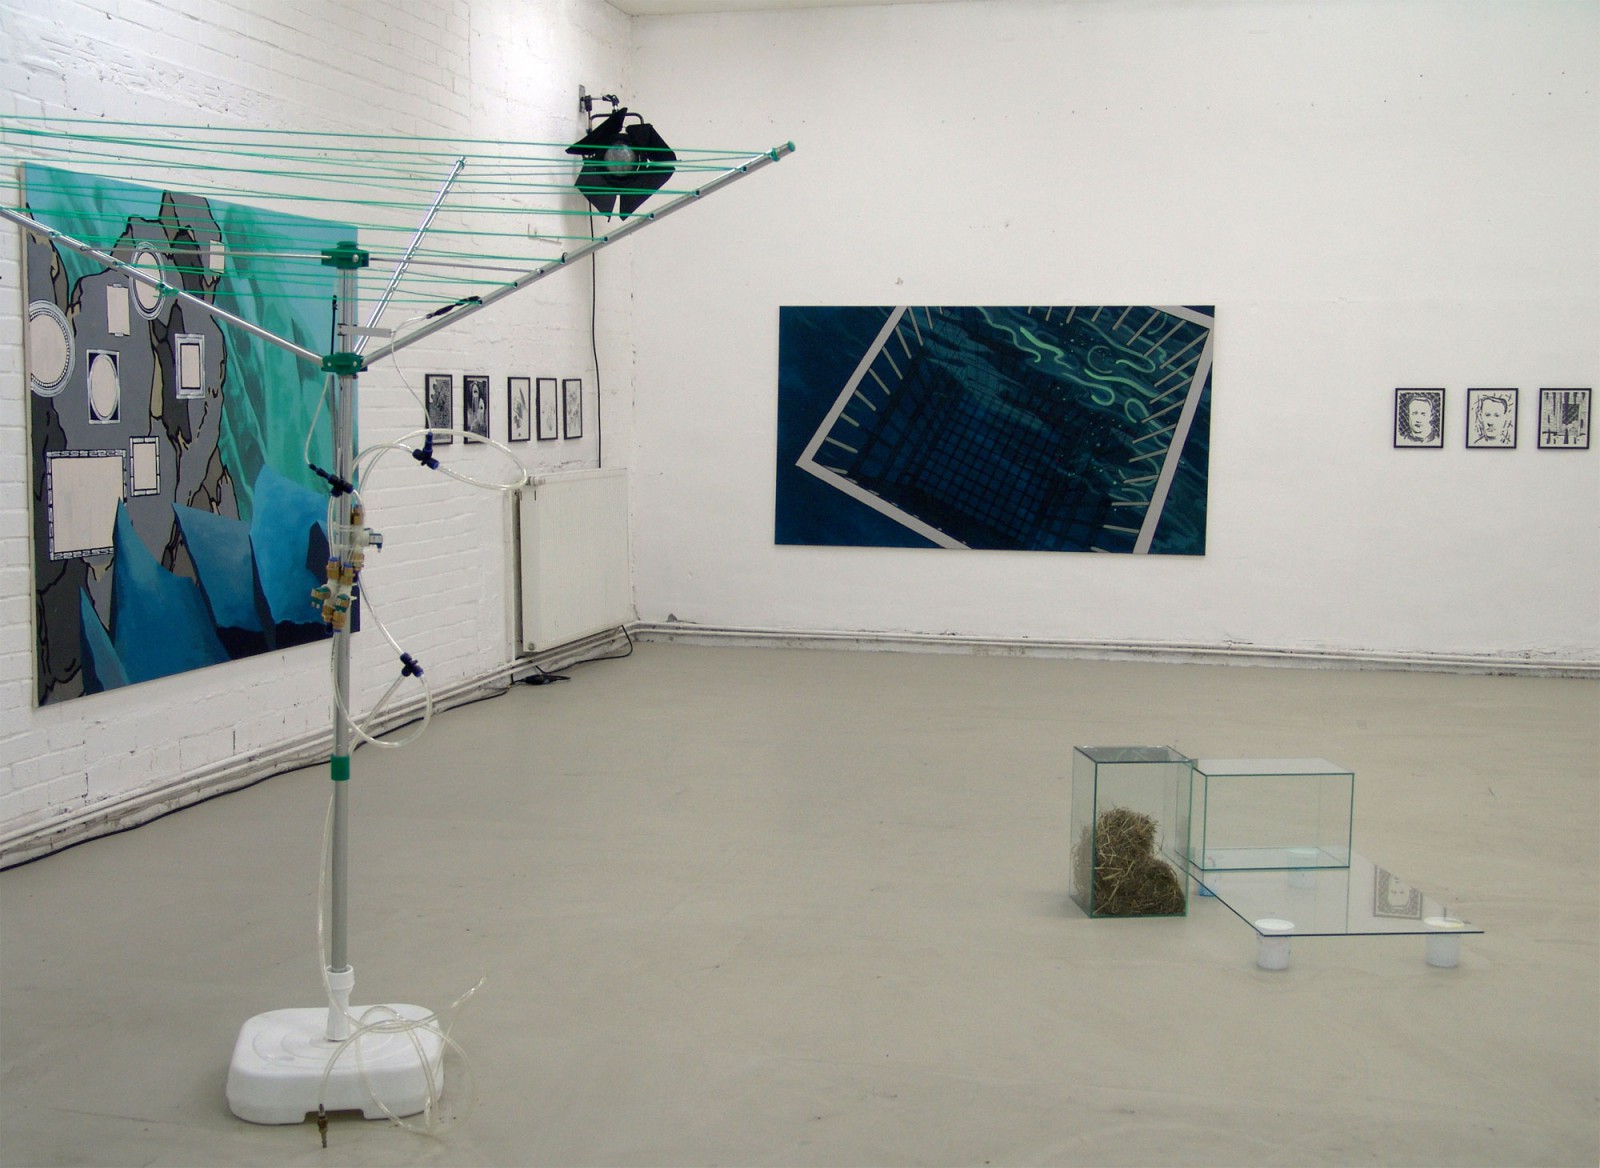 Kim Nekarda: The Possibility of being real / part one, 2006, Autocenter, Berlin, Thomas Kratz, Michael Pfrommer, Mandla Reuter